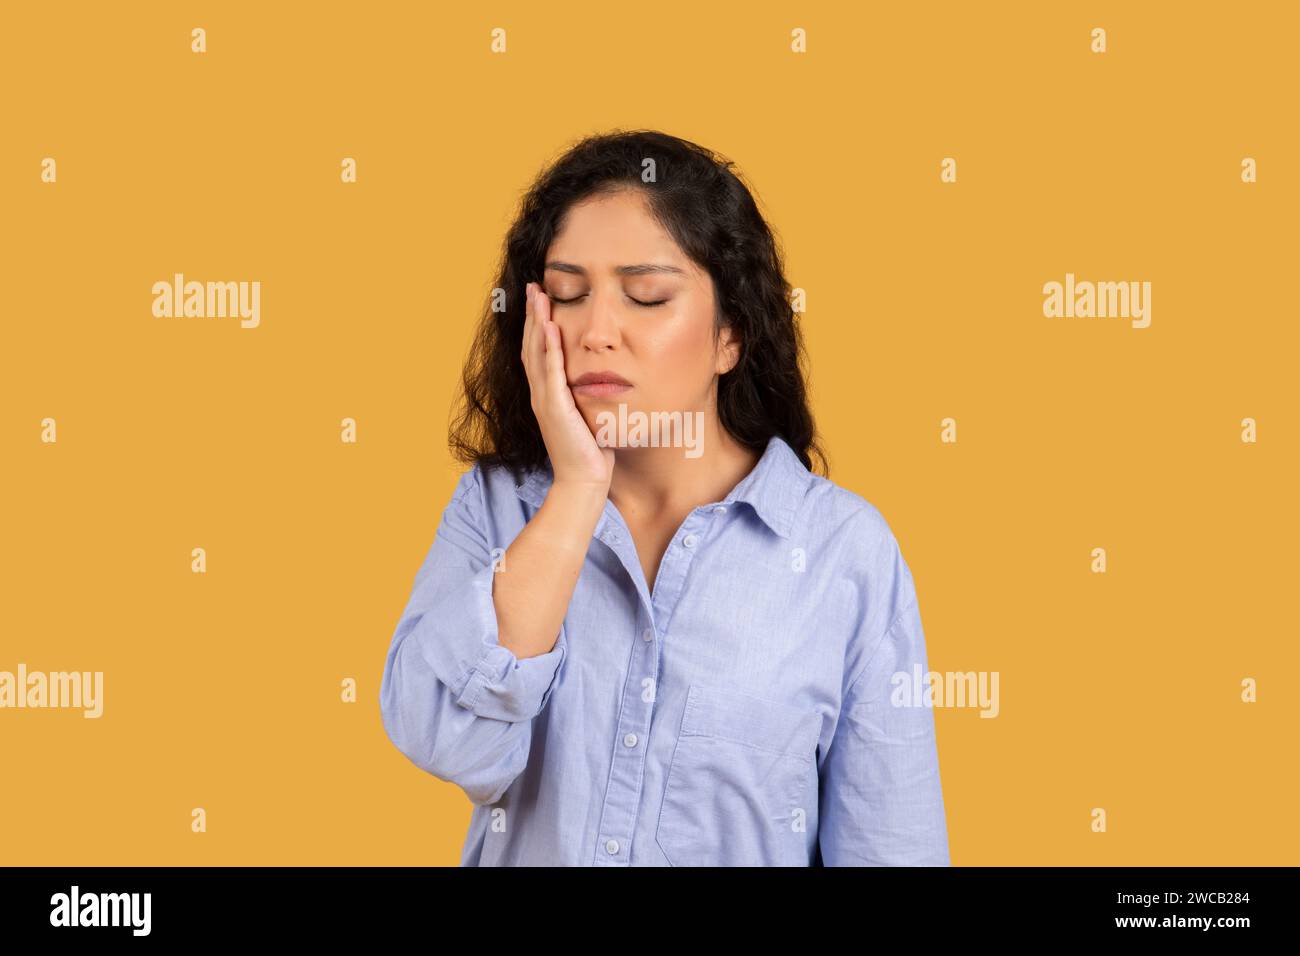 Woman with a pained expression, hand on her cheek, eyes closed, possibly suffering from a toothache Stock Photo